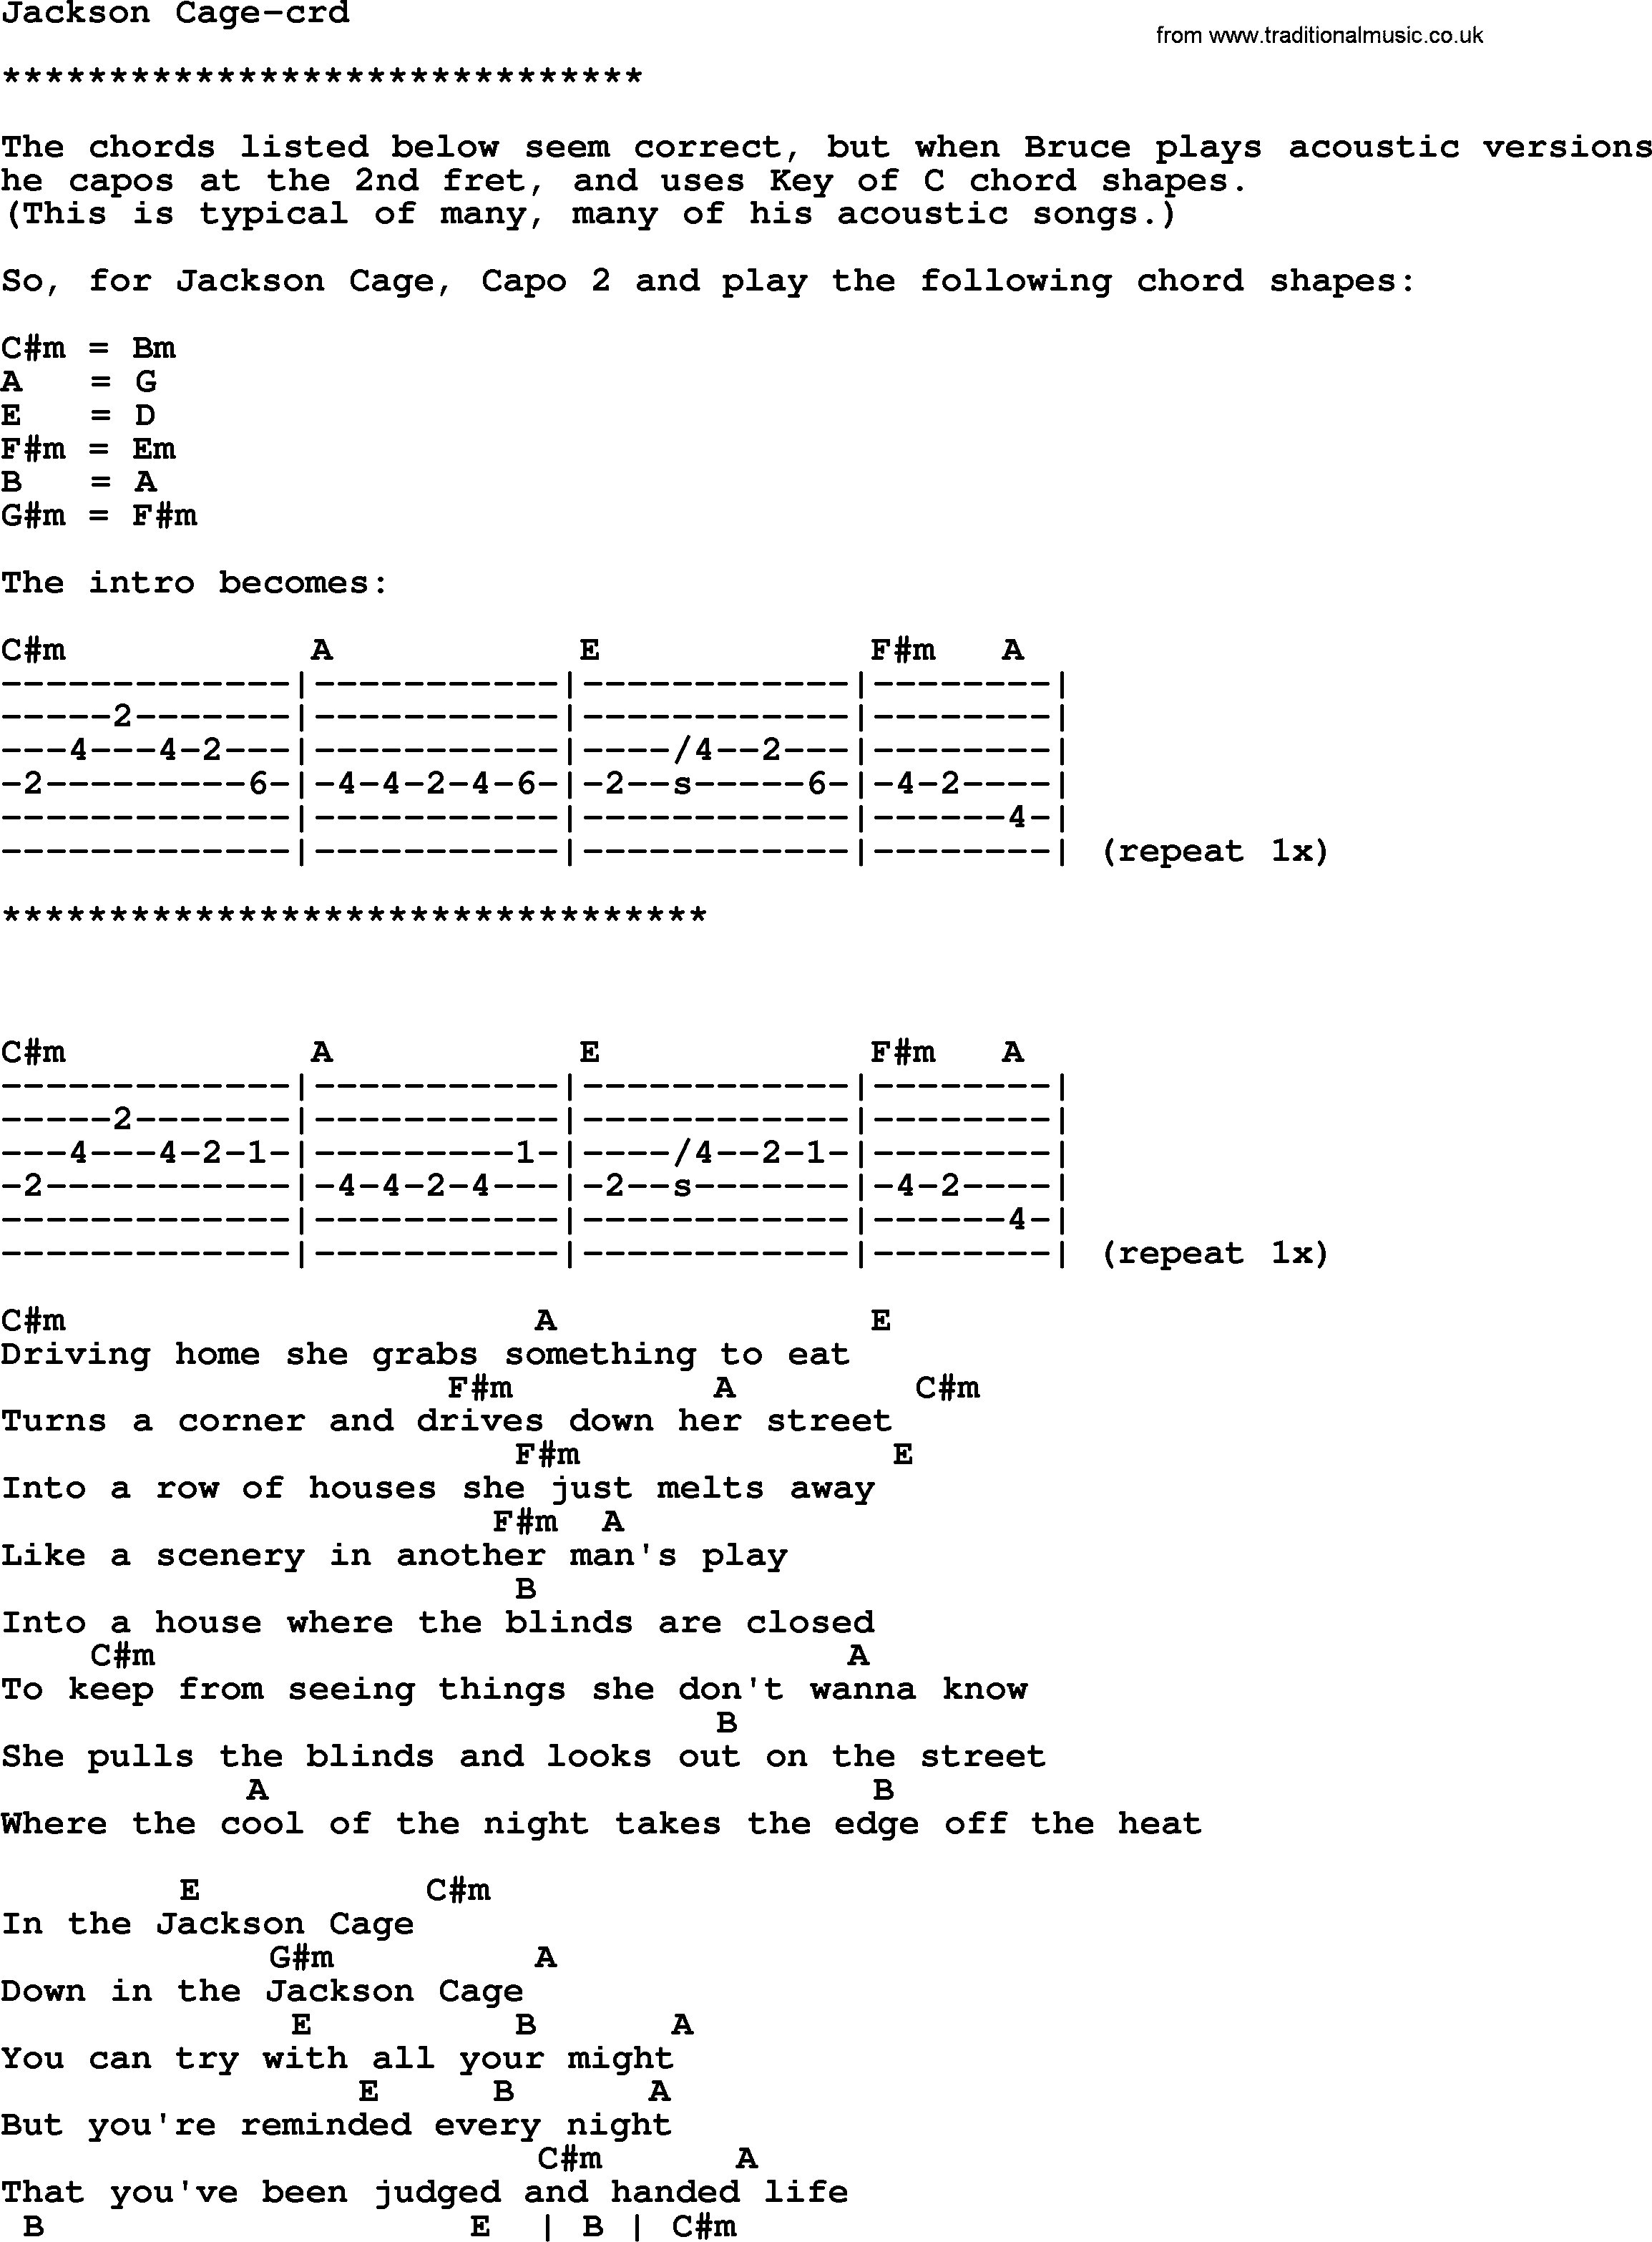 Bruce Springsteen song: Jackson Cage, lyrics and chords